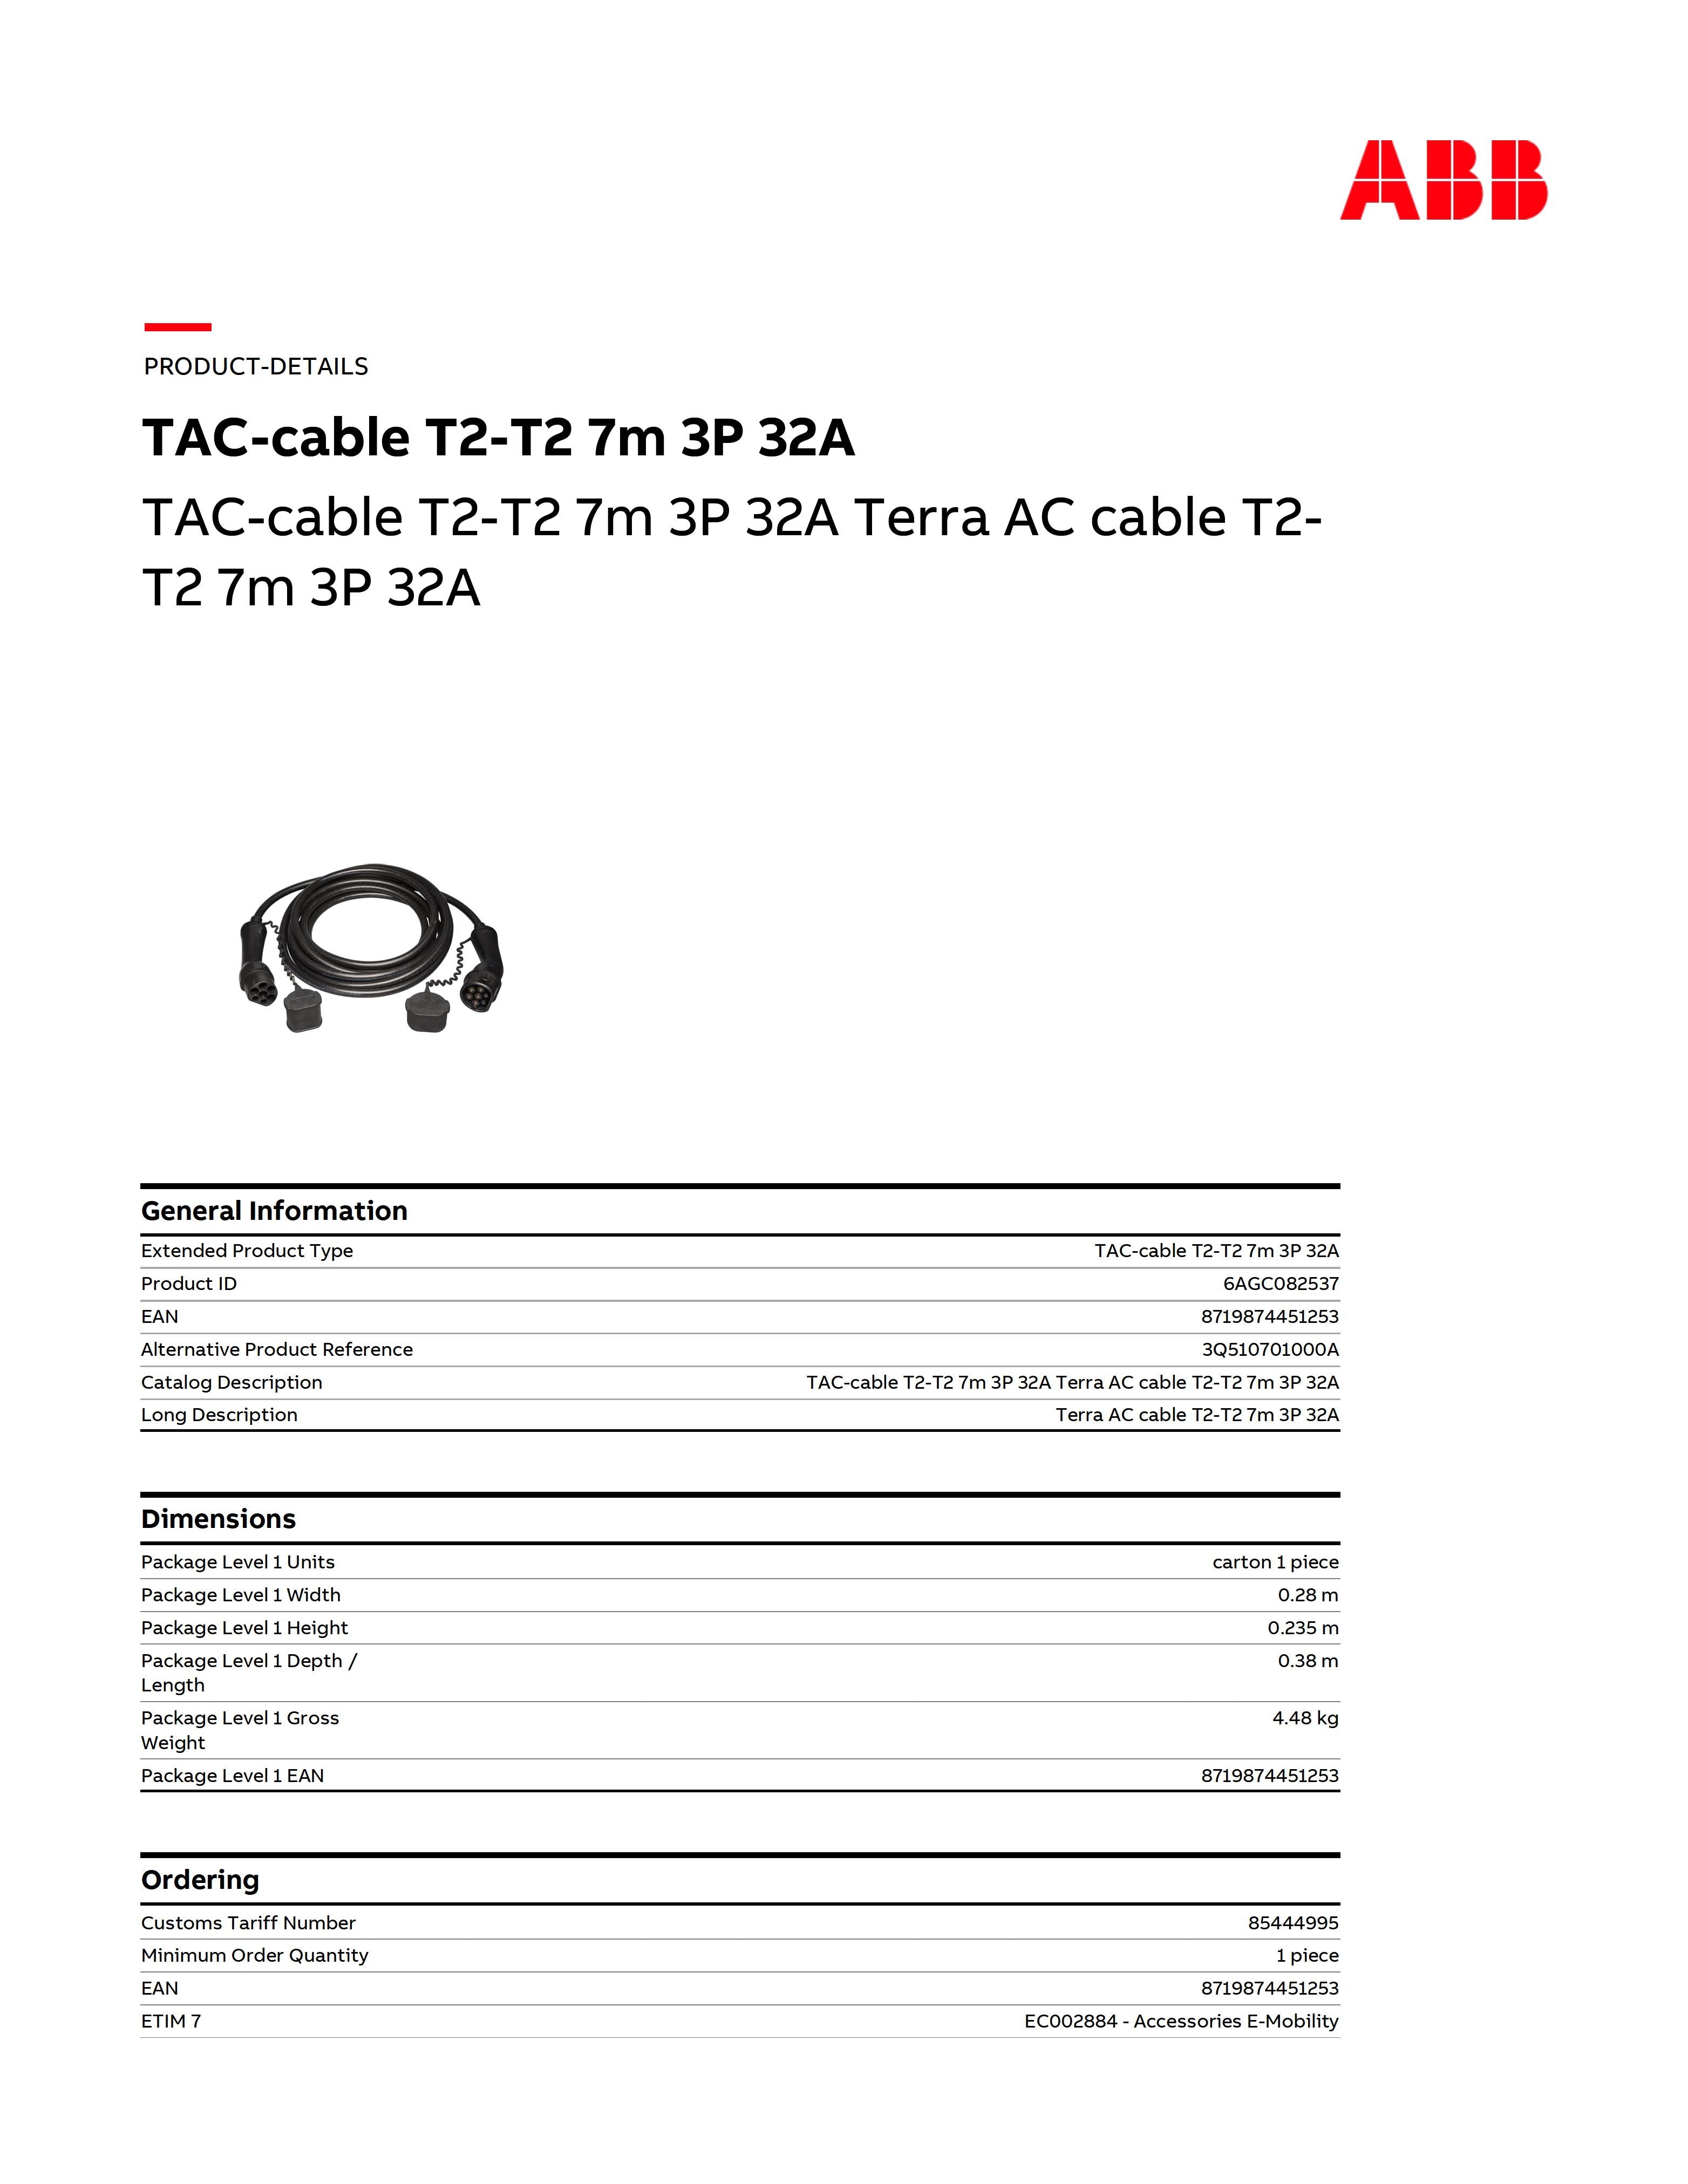 ABB TAC-cable T2-T2 7m3P32A